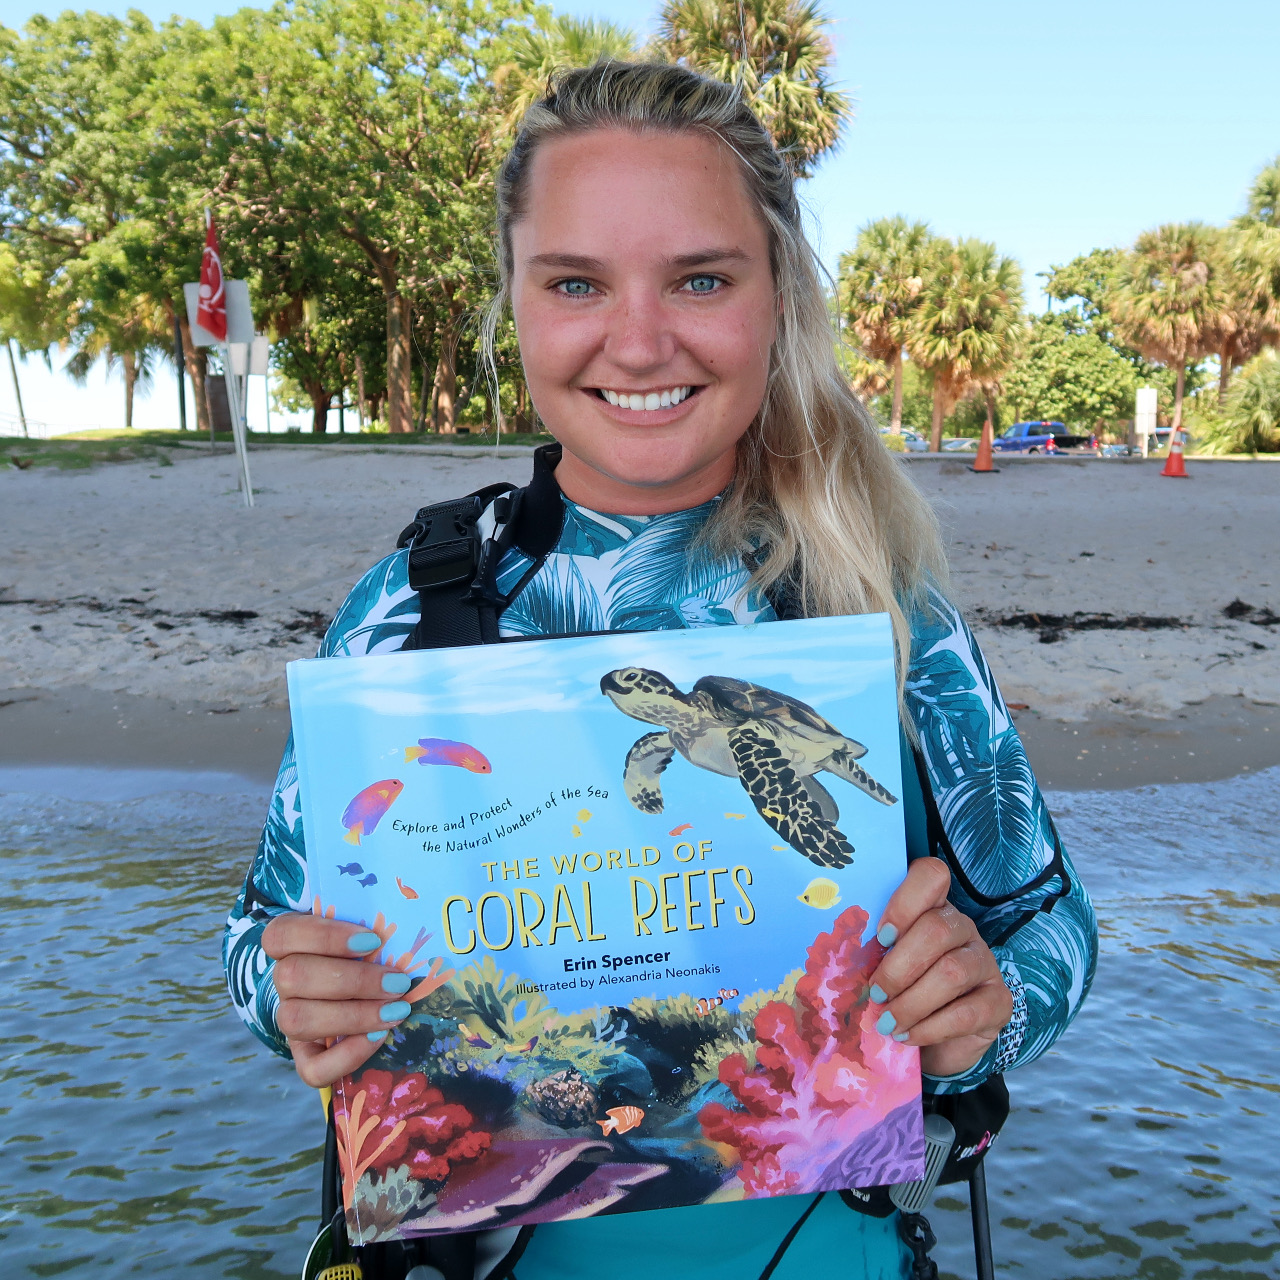 Holding my first children's book, The World of Coral Reefs, which shares the biology, ecology, and conservation of coral reefs with children aged 7-10. PC: Drew Butkowski